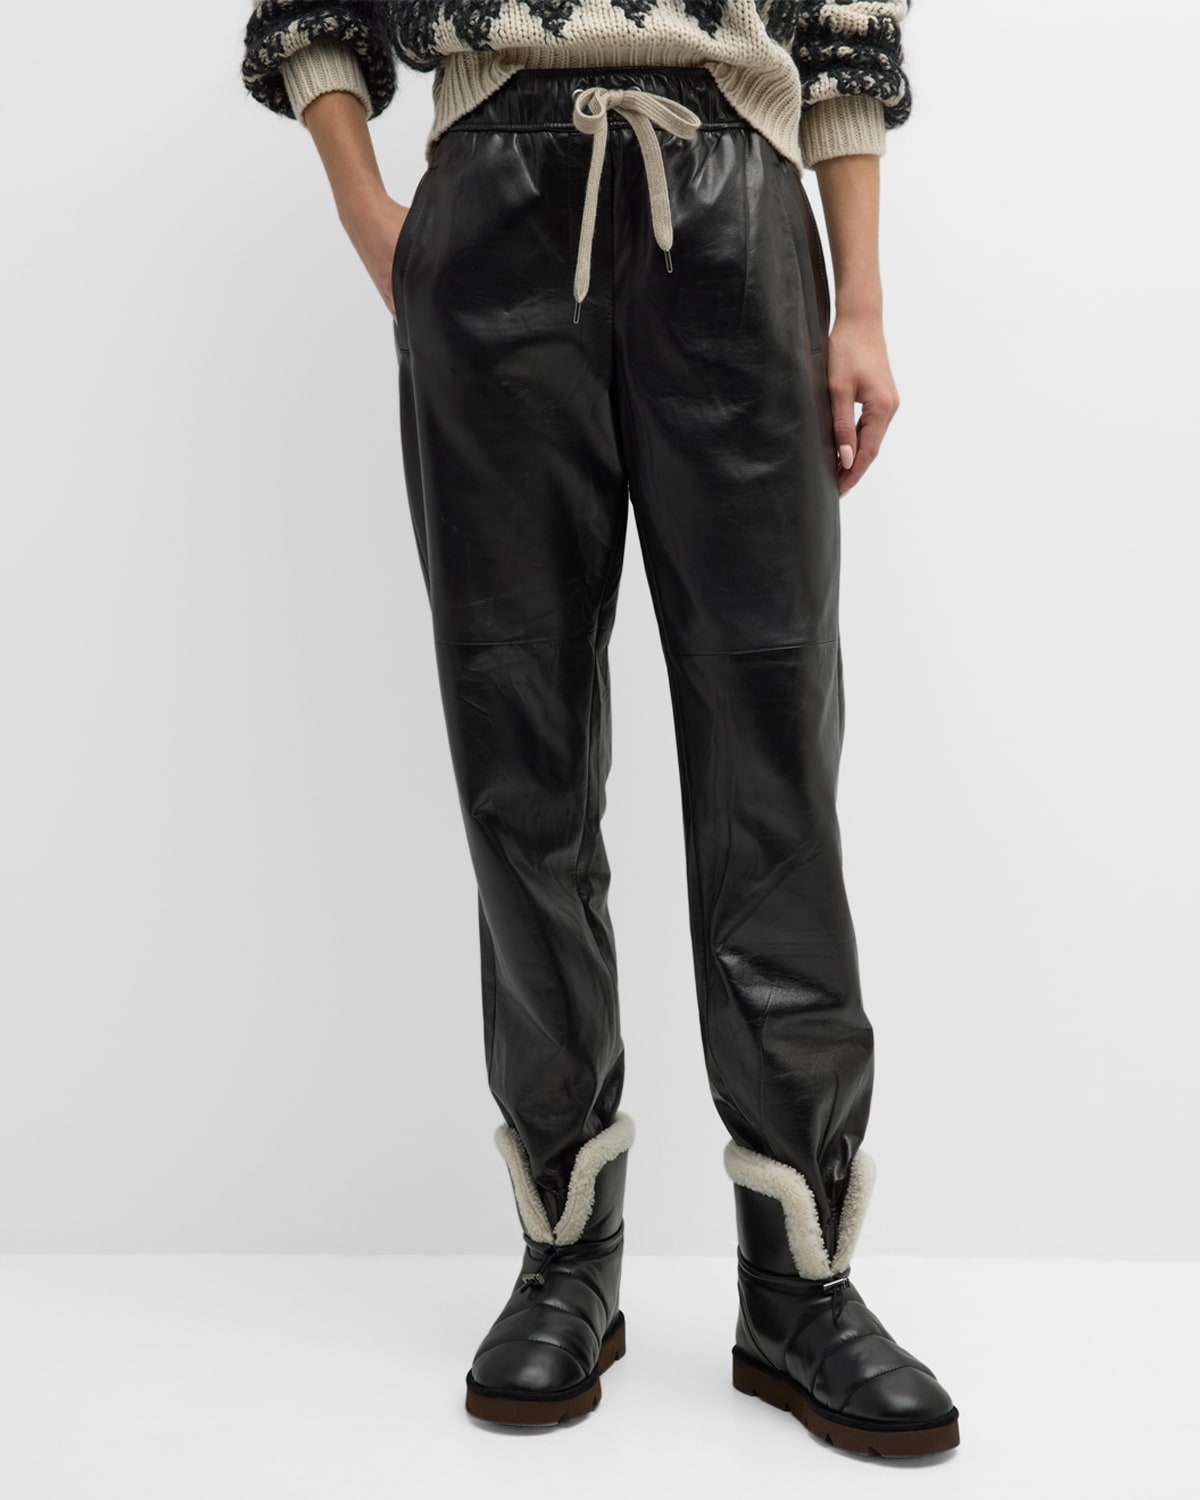 BRUNELLO CUCINELLI GLOSSY NAPA LEATHER TRACK PANTS WITH ELASTICATED WAIST